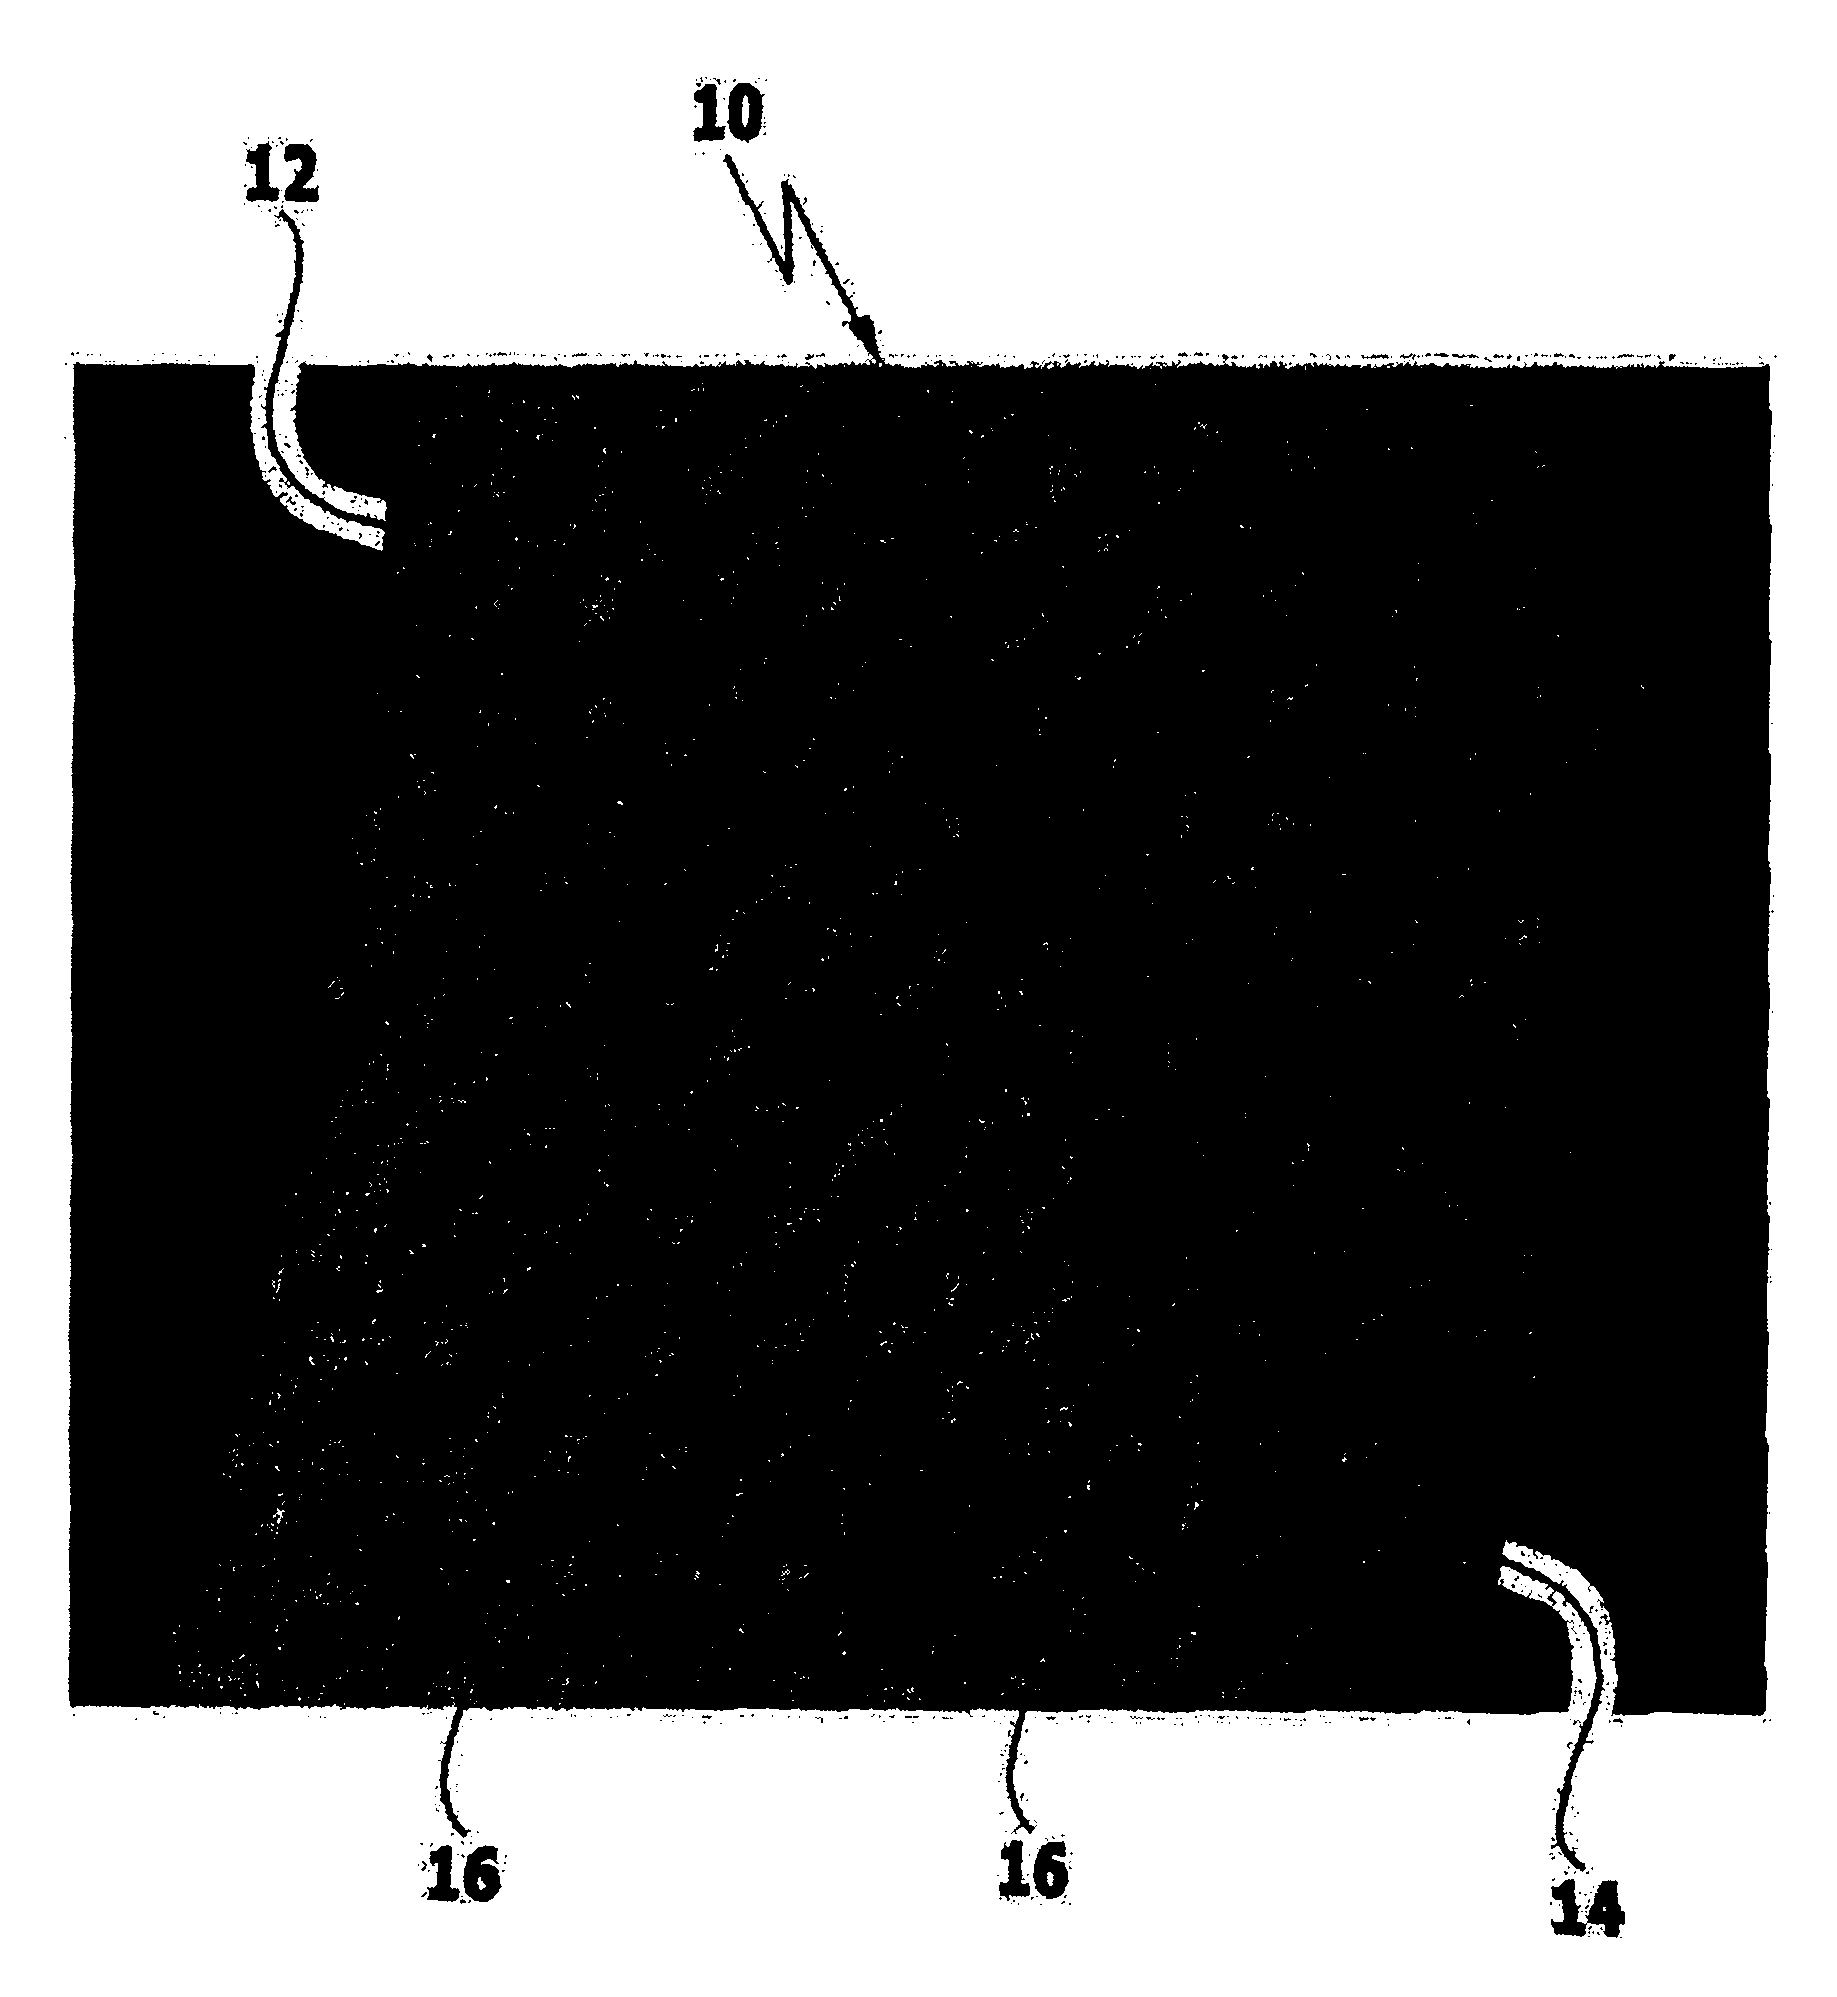 Polymer compound and components produced using the compound